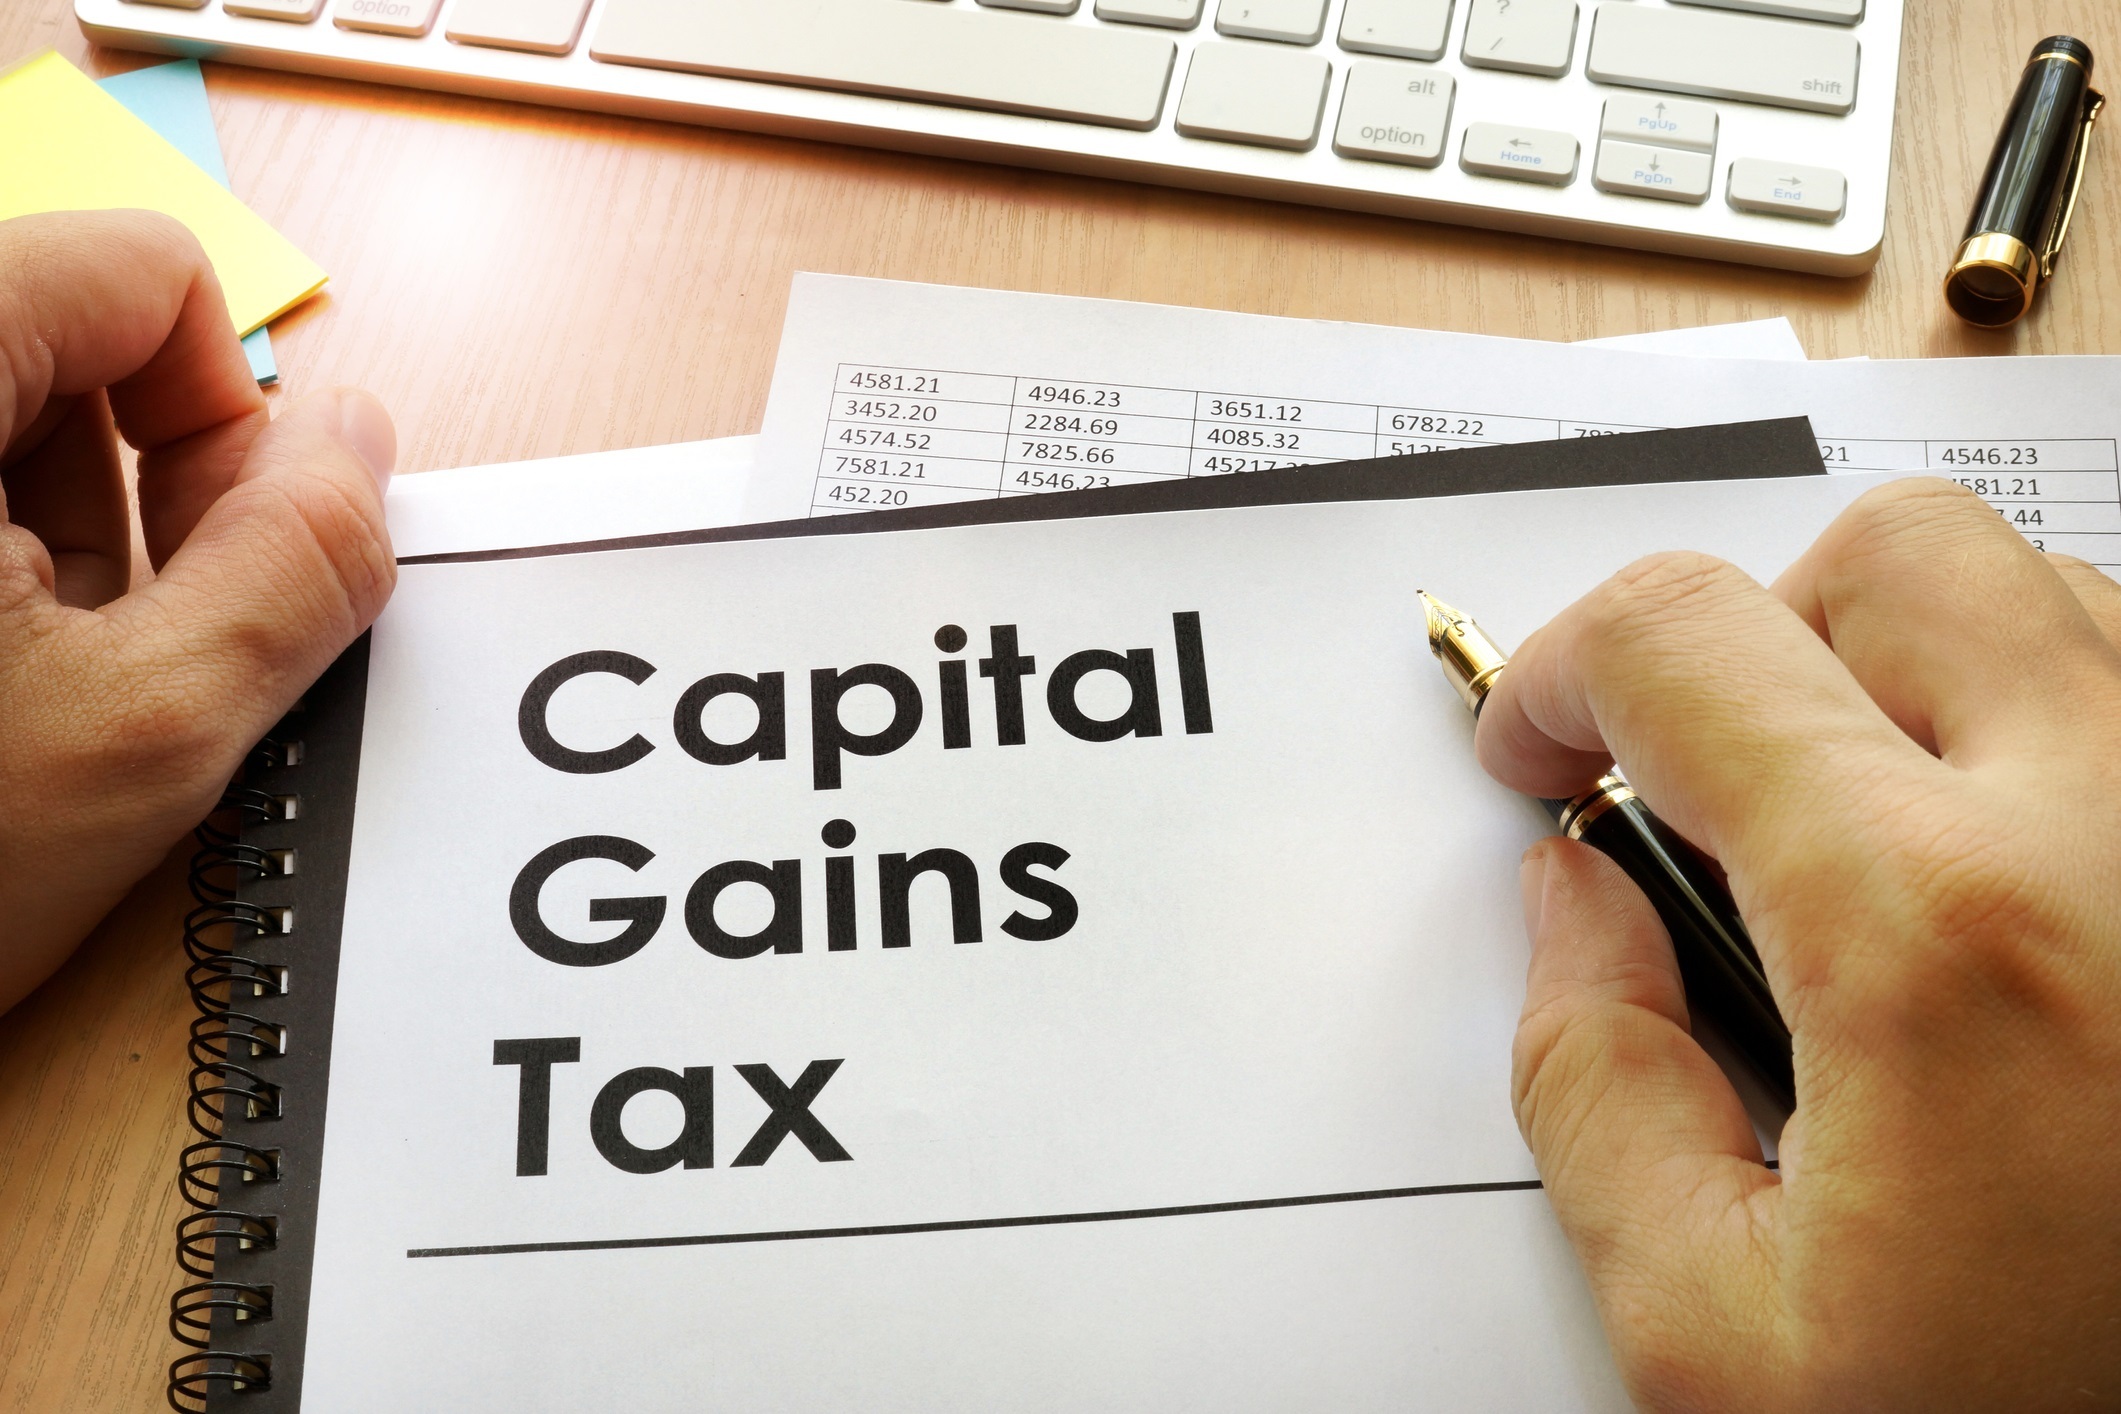 Image to represent Capital Gains Tax – Is it possible to have a Capital Gains Tax System that is simple yet fair?